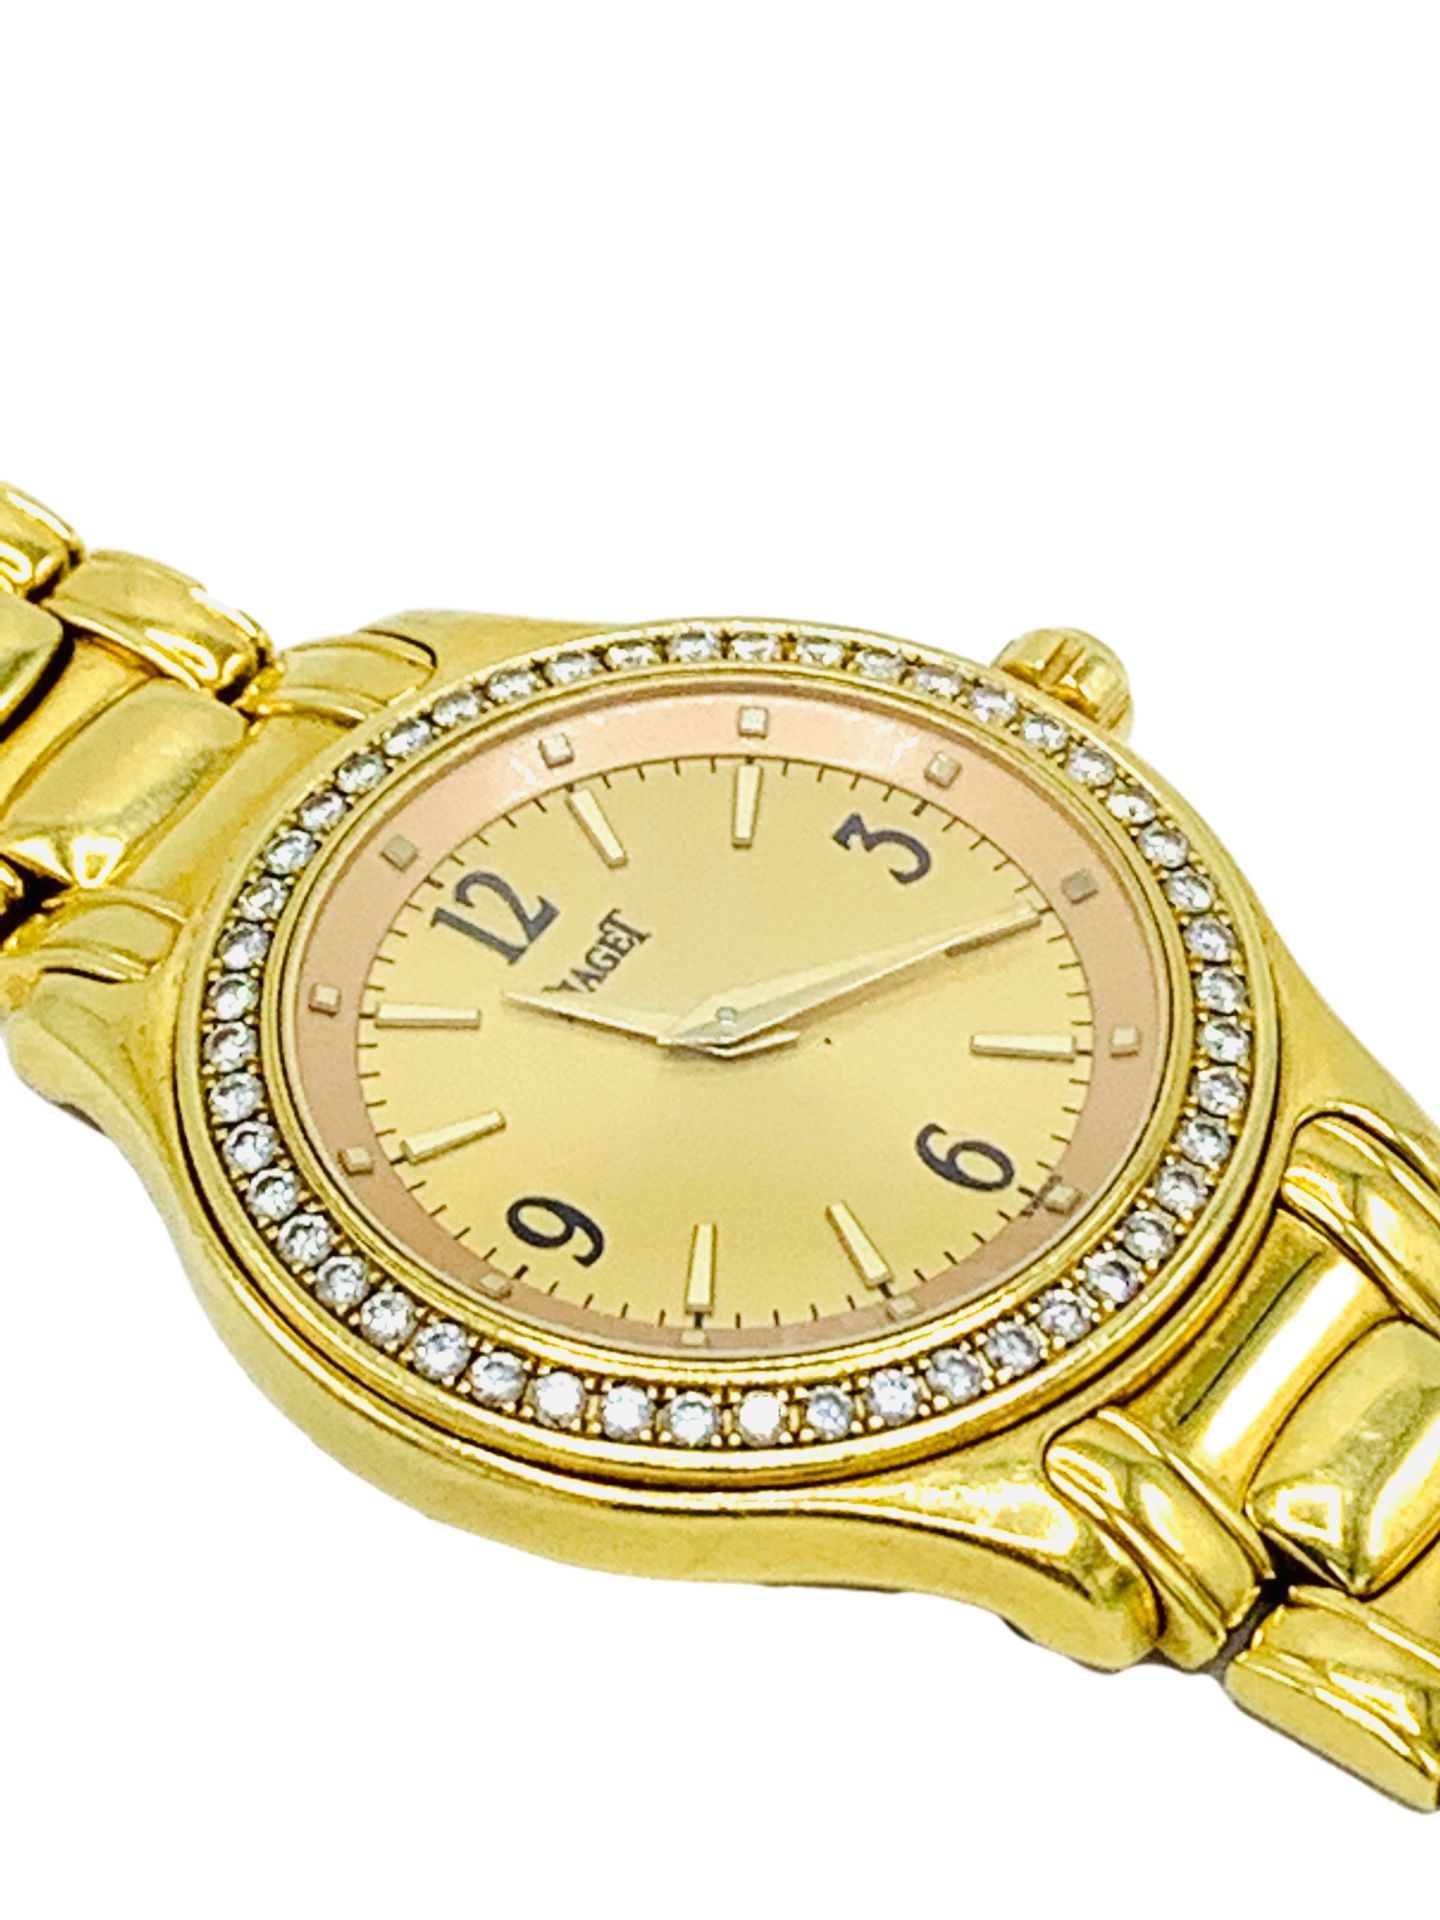 18ct gold cased Piaget watch.